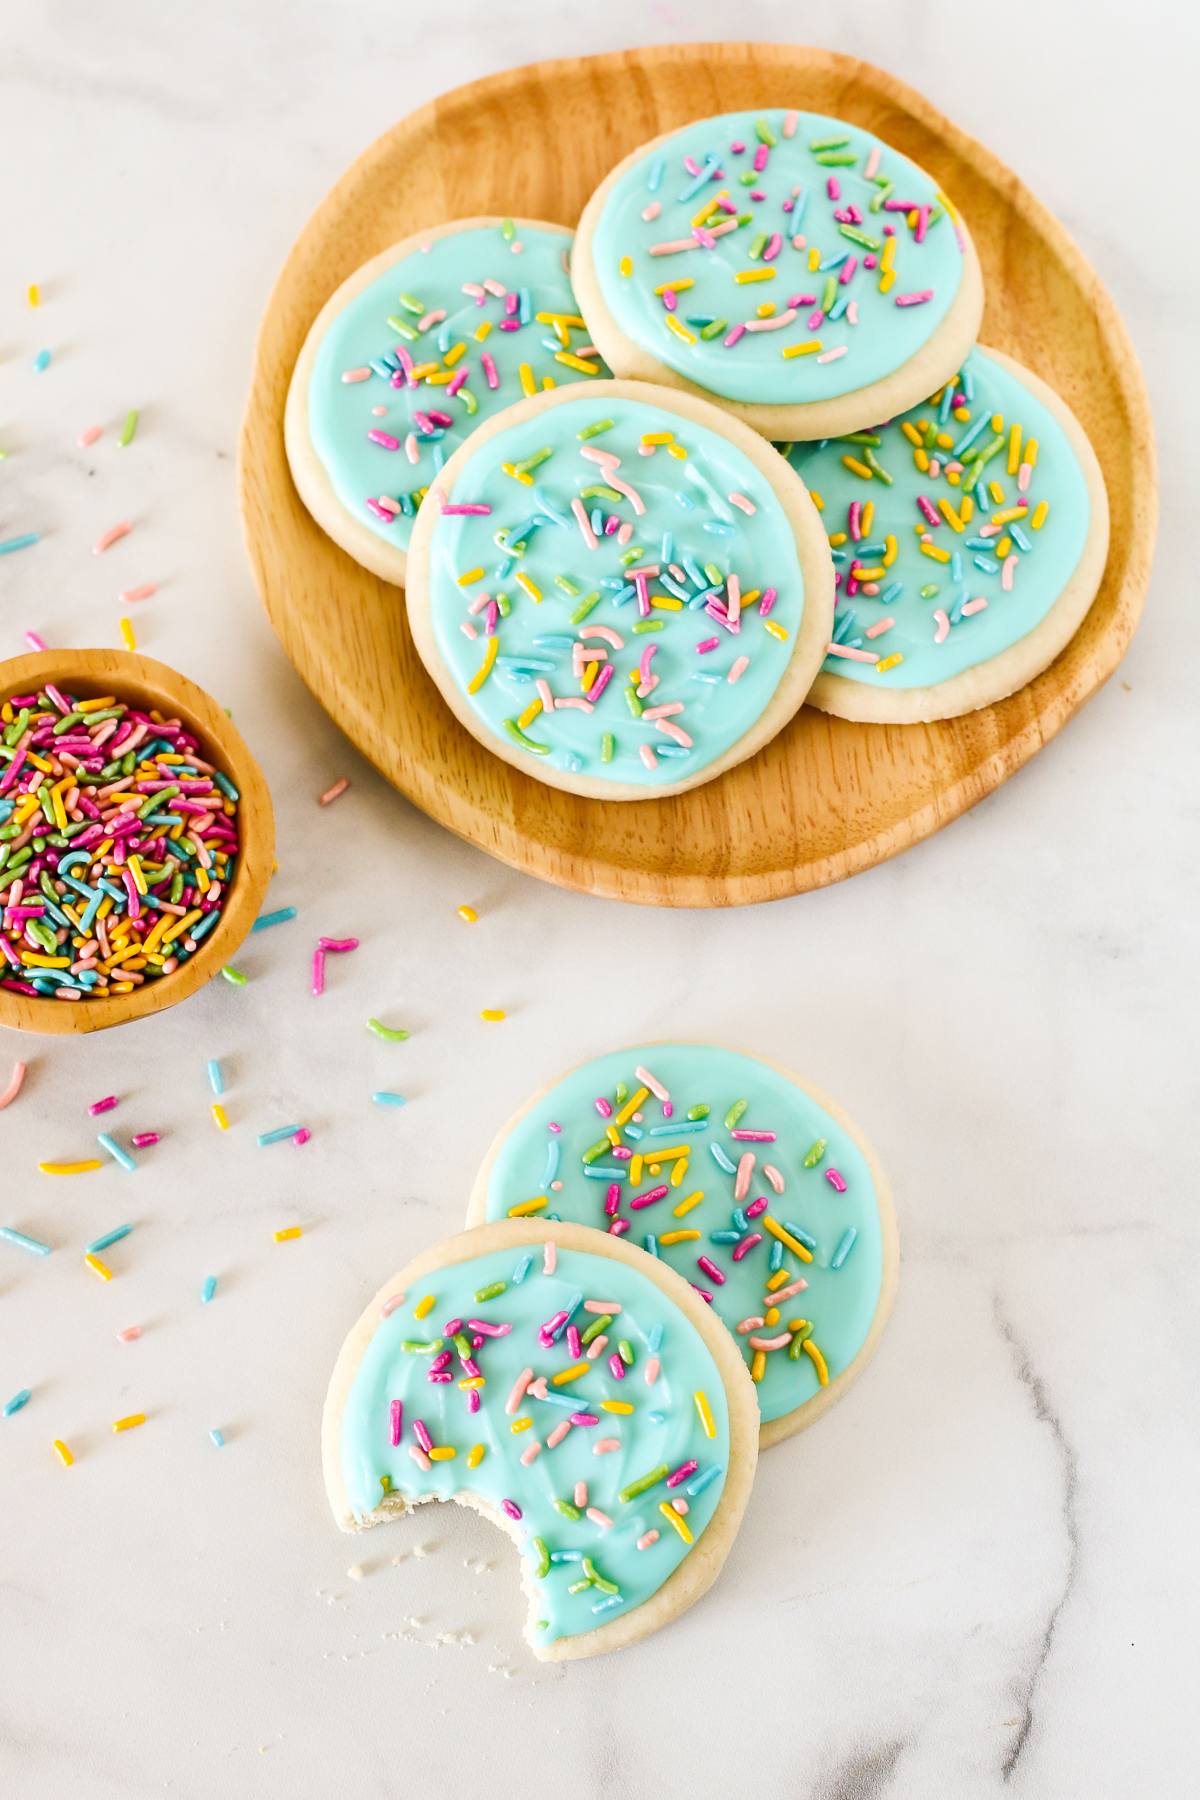 Gluten Free Vegan Frosted Sugar Cookies. The perfect rolled and cutout sugar cookies, with a simple vanilla frosting. A classic cookie for any occasion!